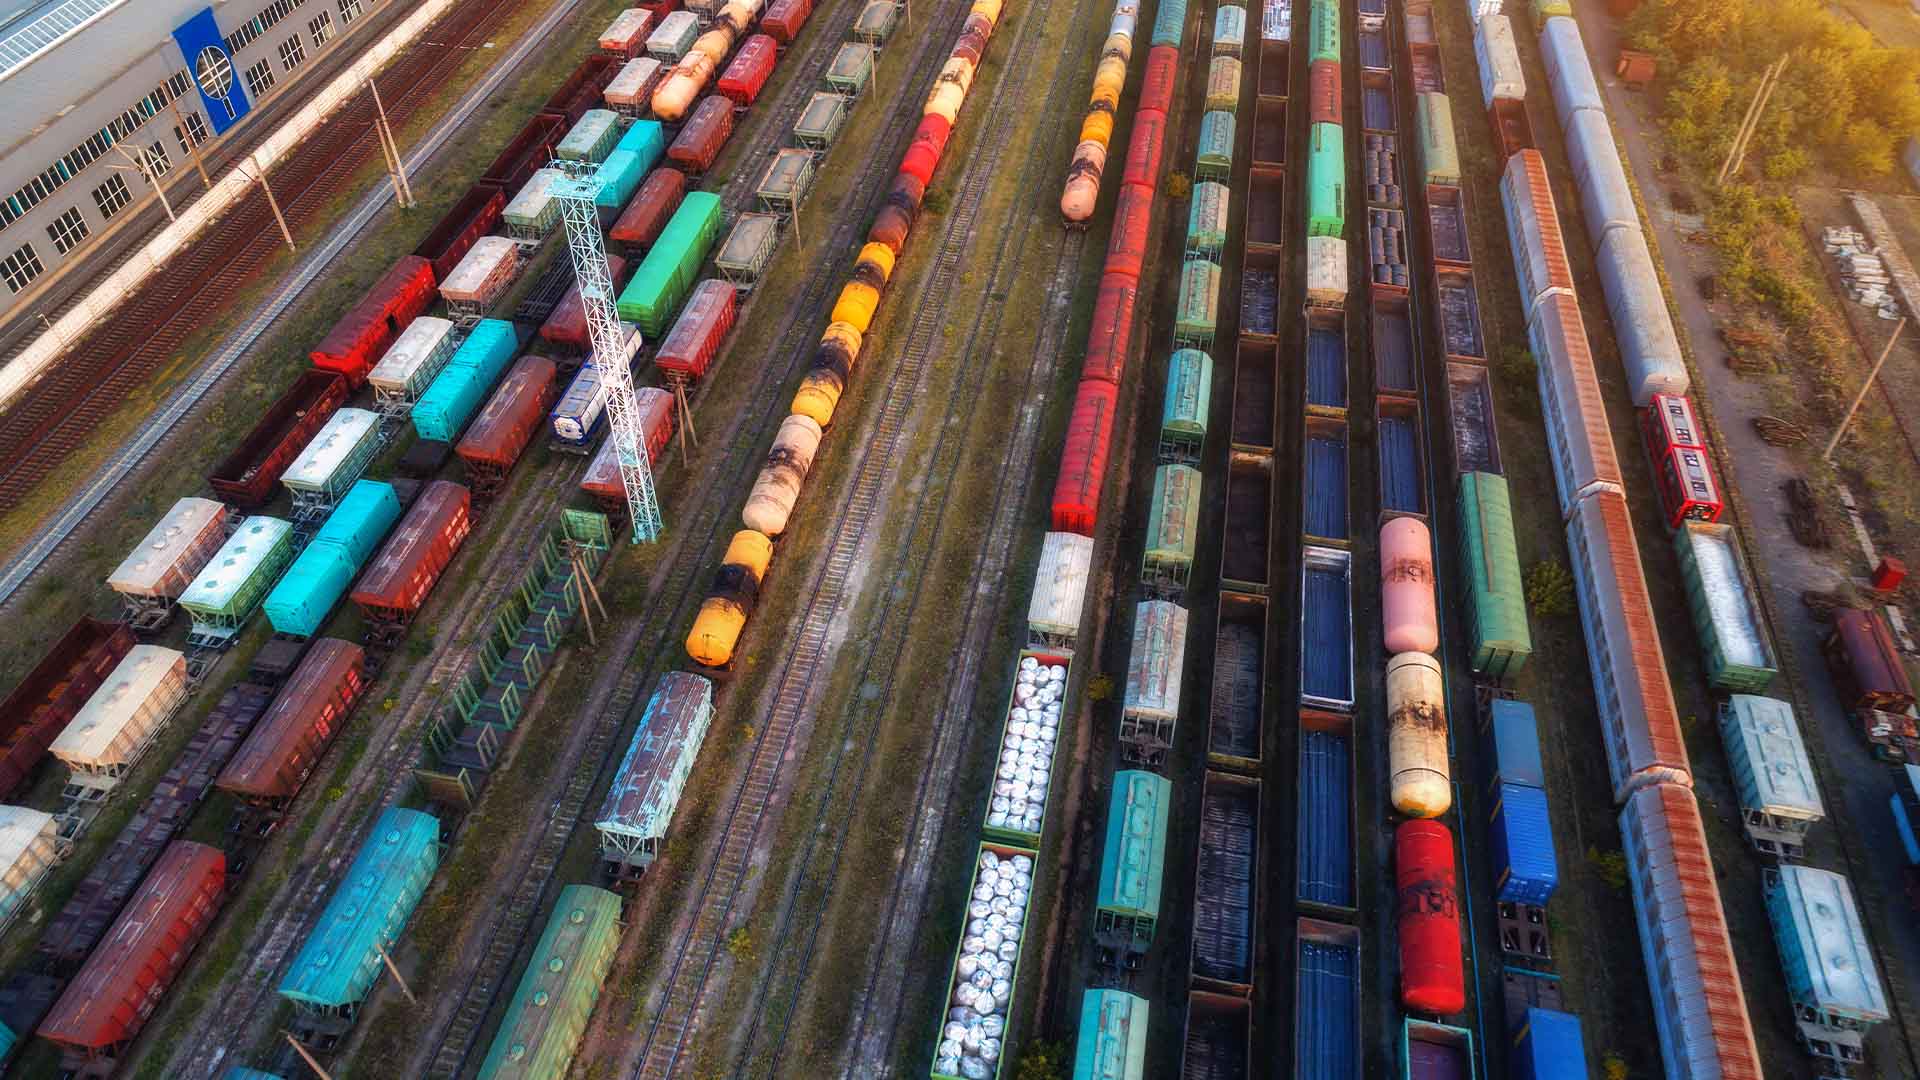 Photo of containers in a train yard